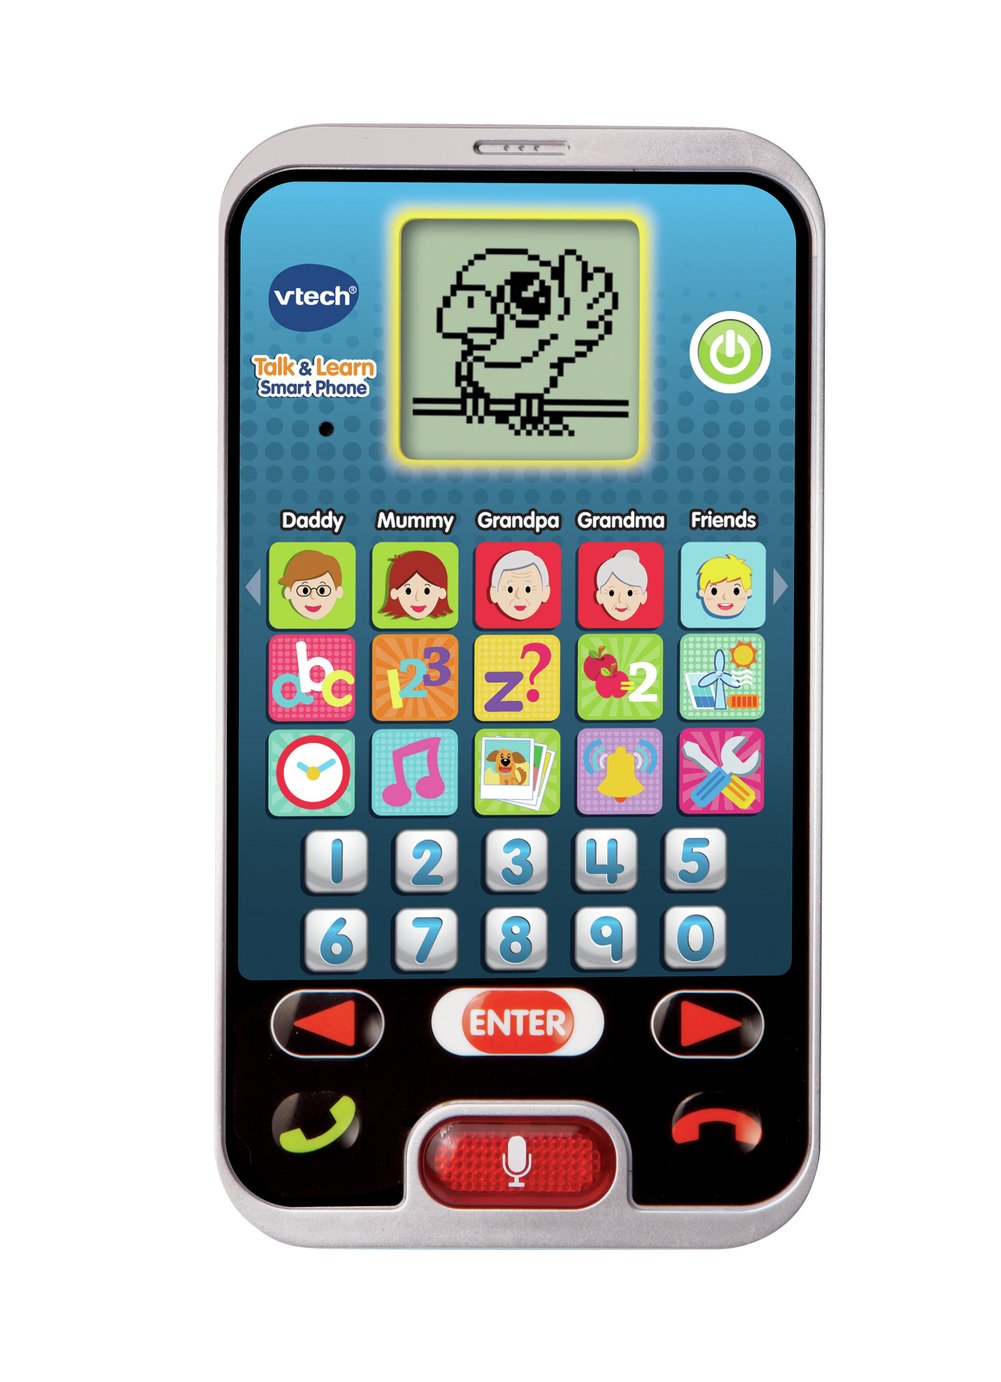 VTech Talk and Learn Smartphone